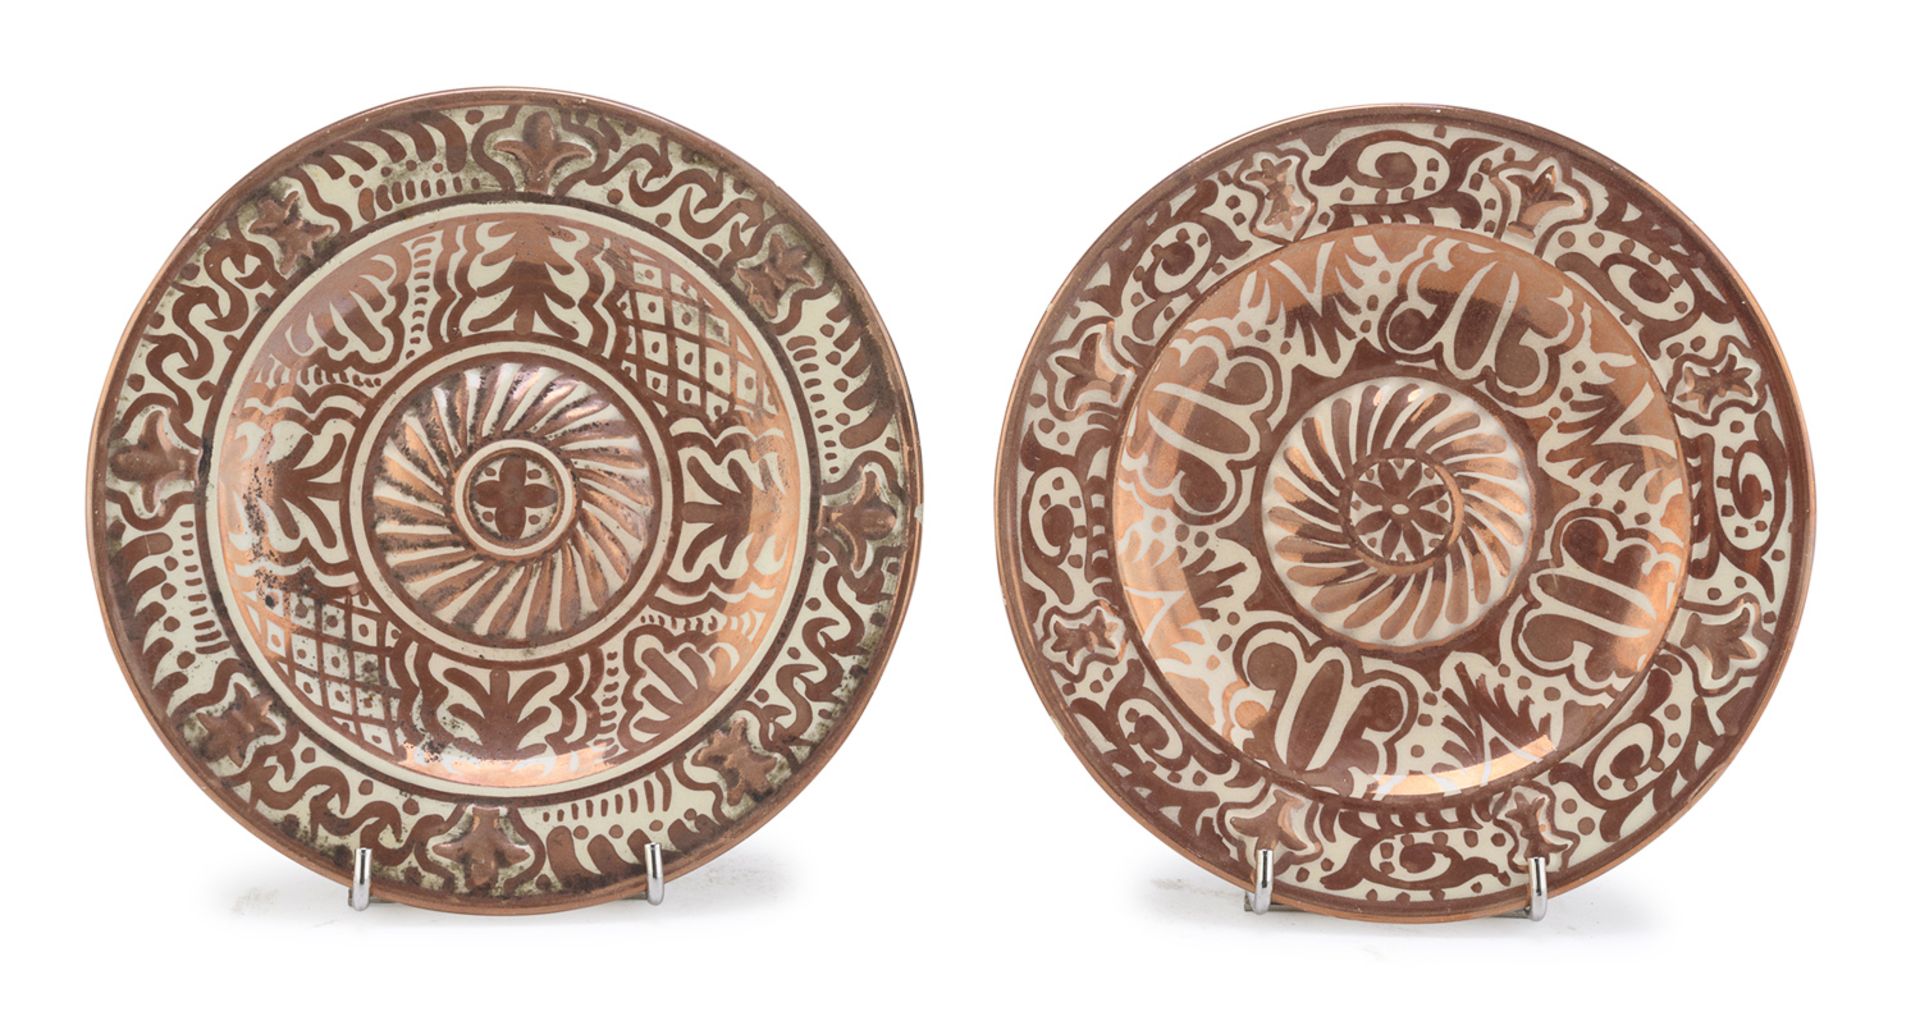 PAIR OF CERAMIC PLATES A. LINARES CORDOBA EARLY 20TH CENTURY